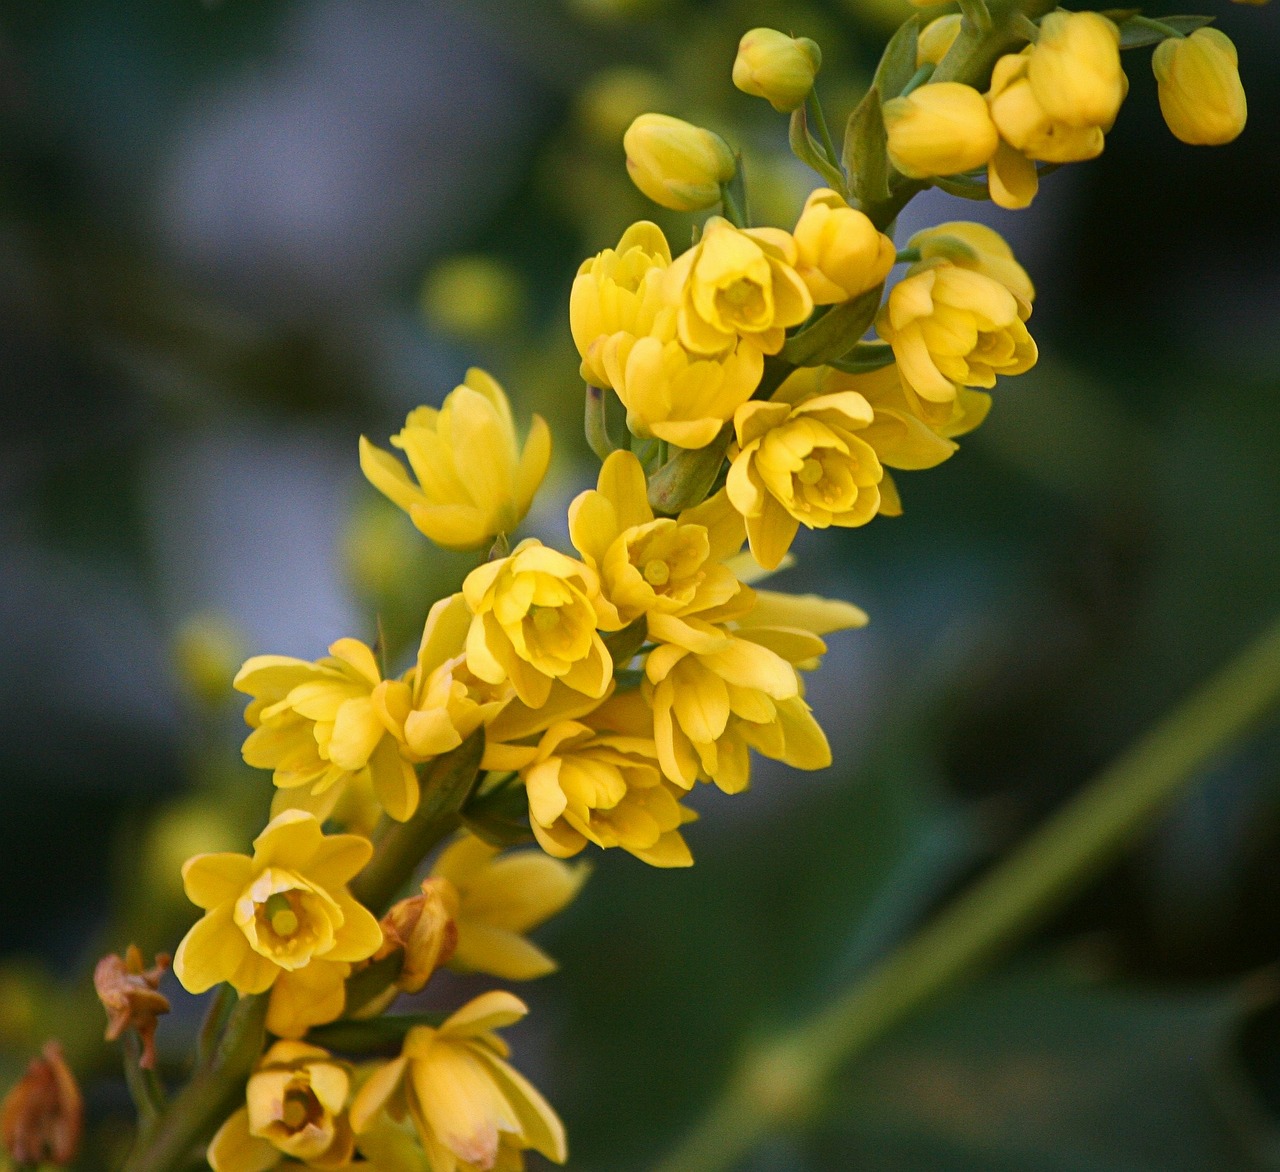 Oregon state flower,mahonia flowers,oregon grape holly,floral,plant